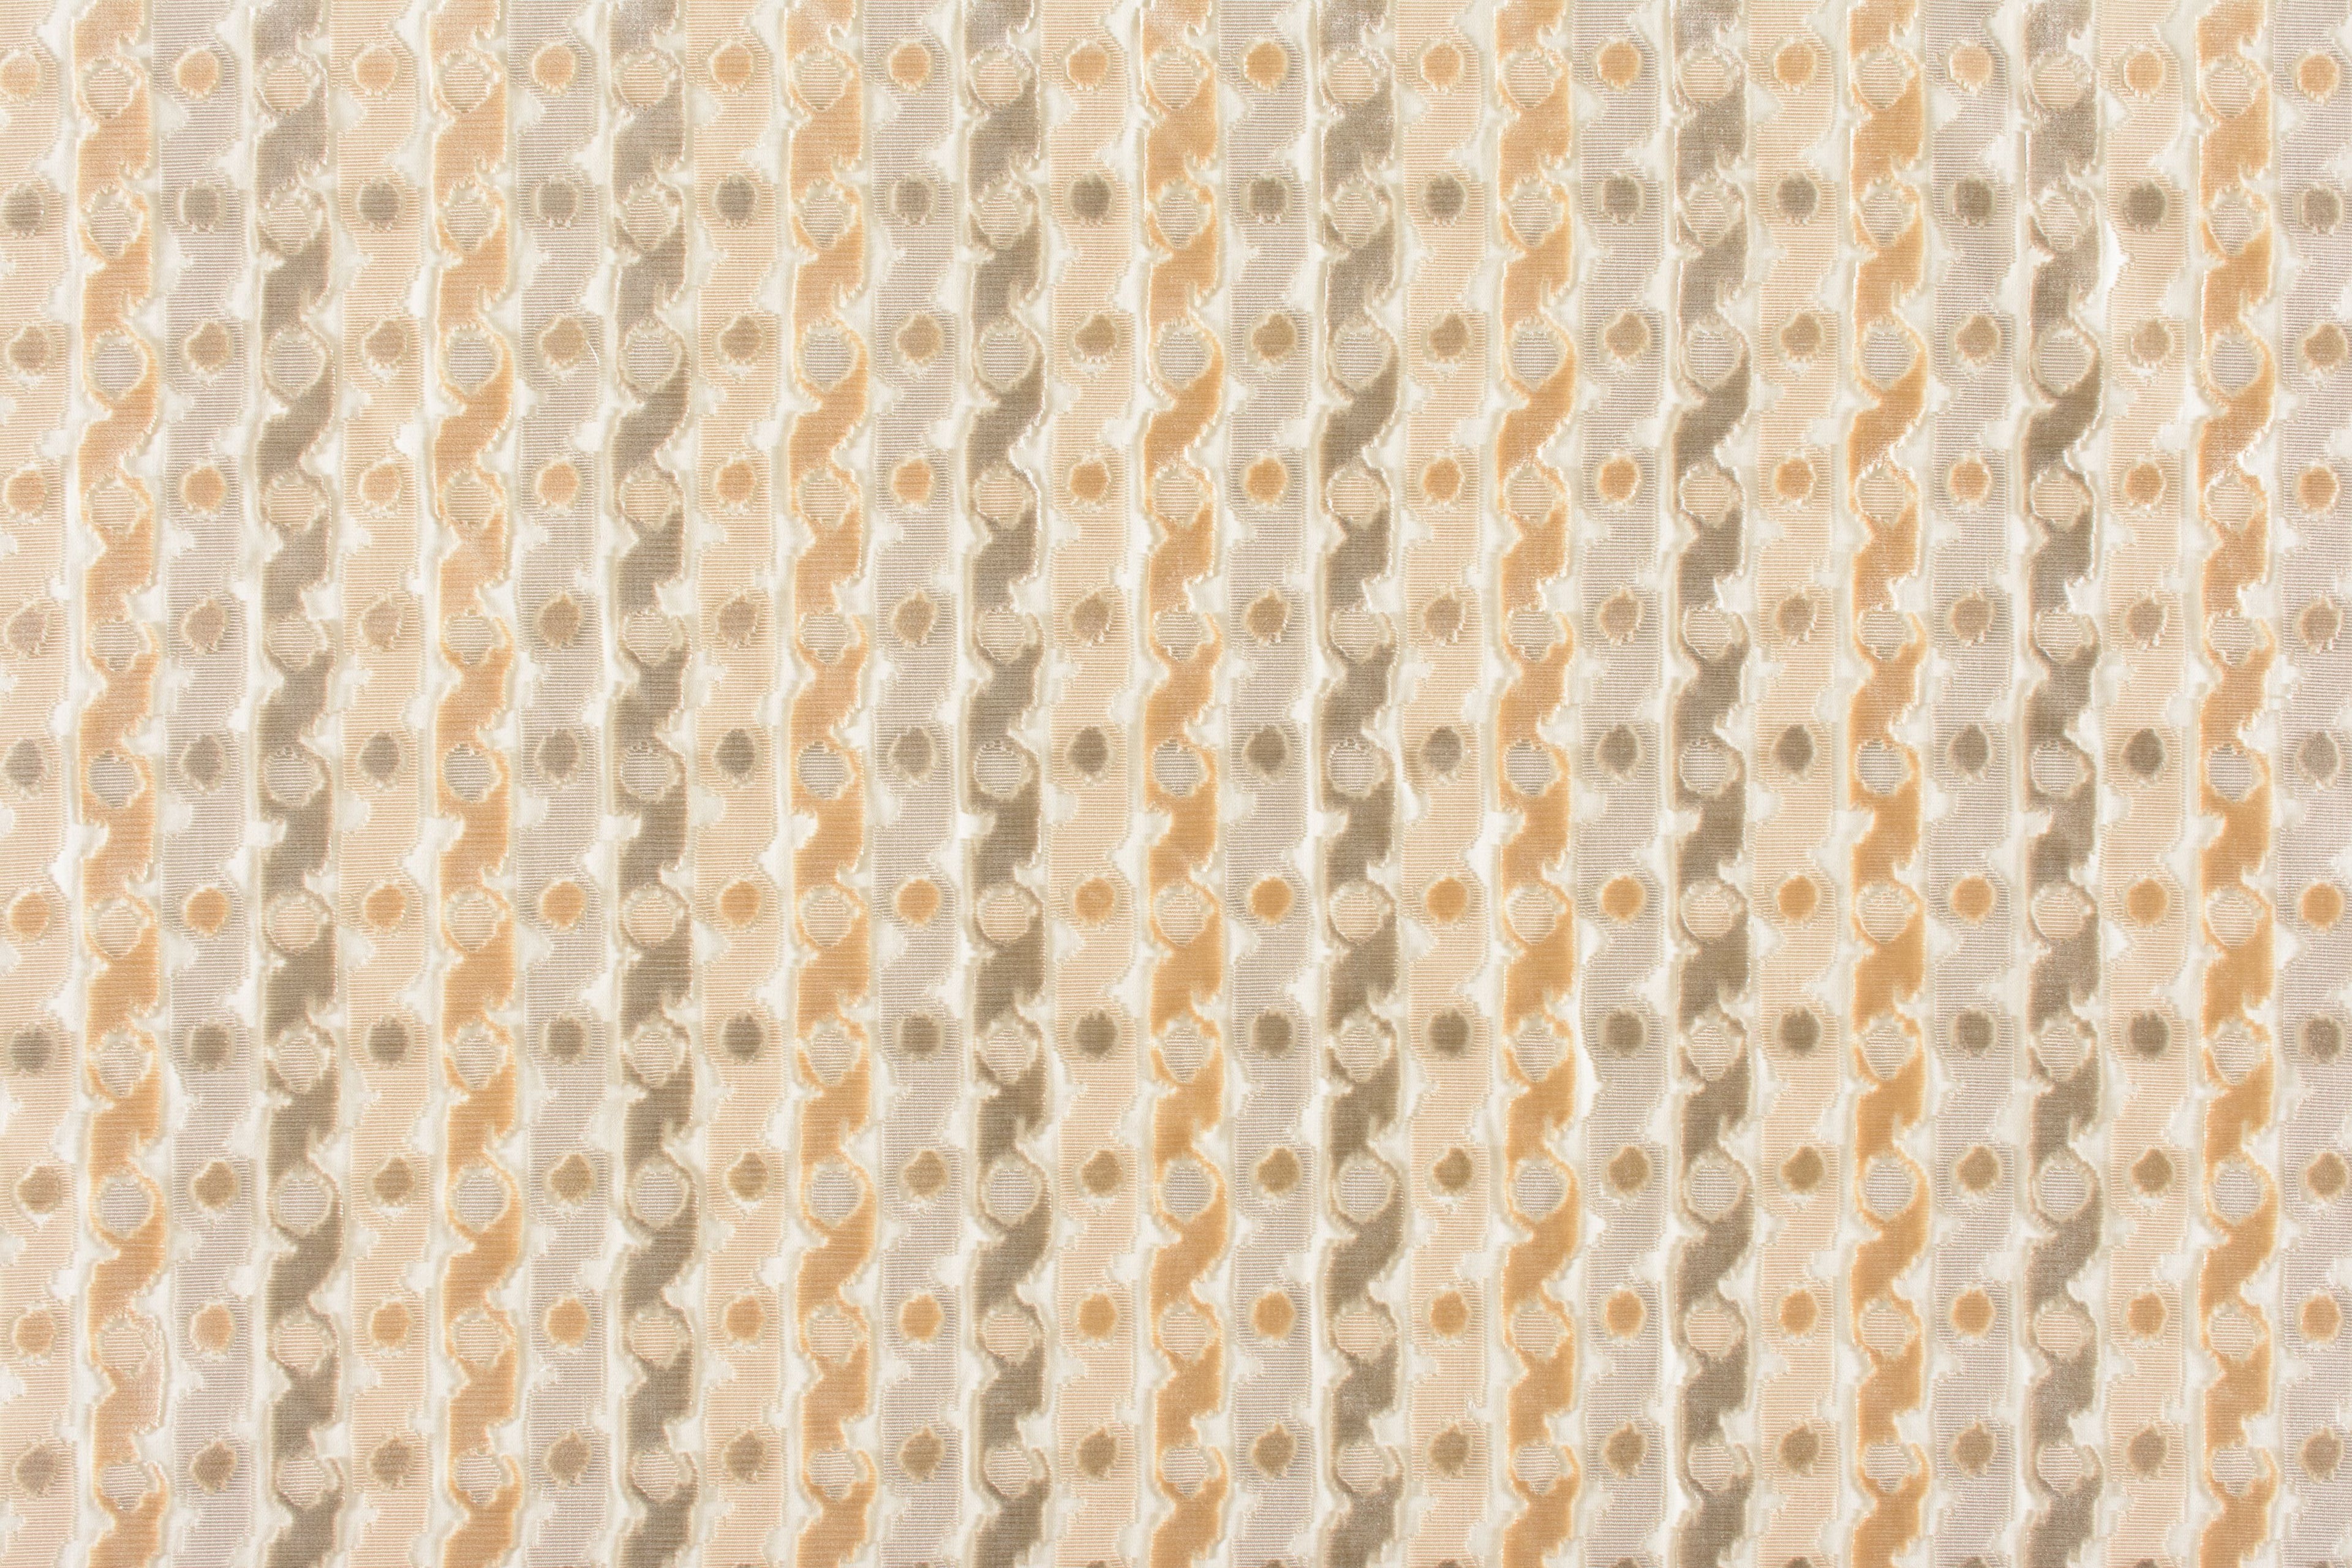 Velours Bergerac fabric in beige color - pattern number JM 0001JVEL - by Scalamandre in the Old World Weavers collection